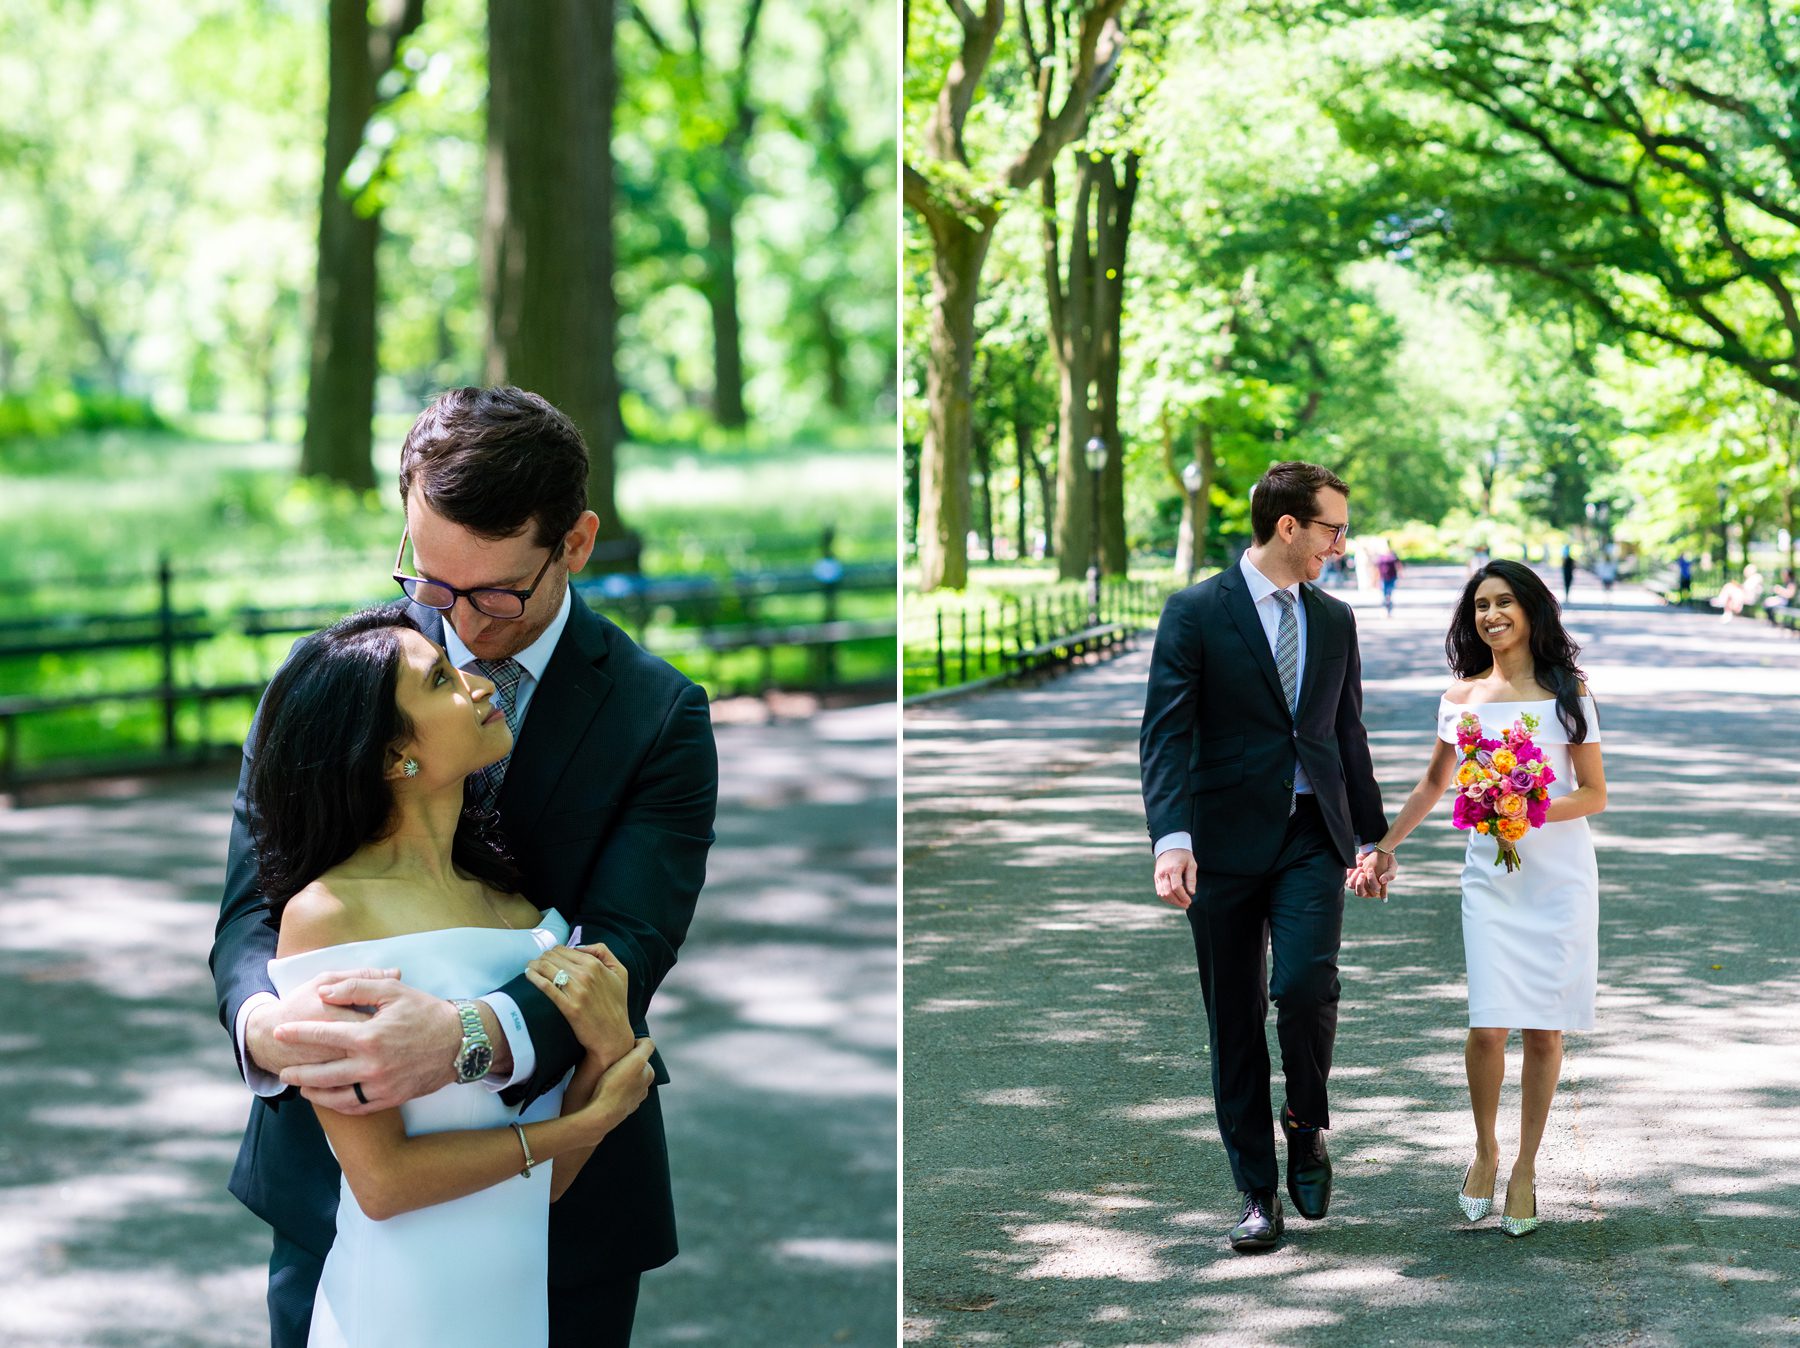 Taking Elopement Photos in Central Park 